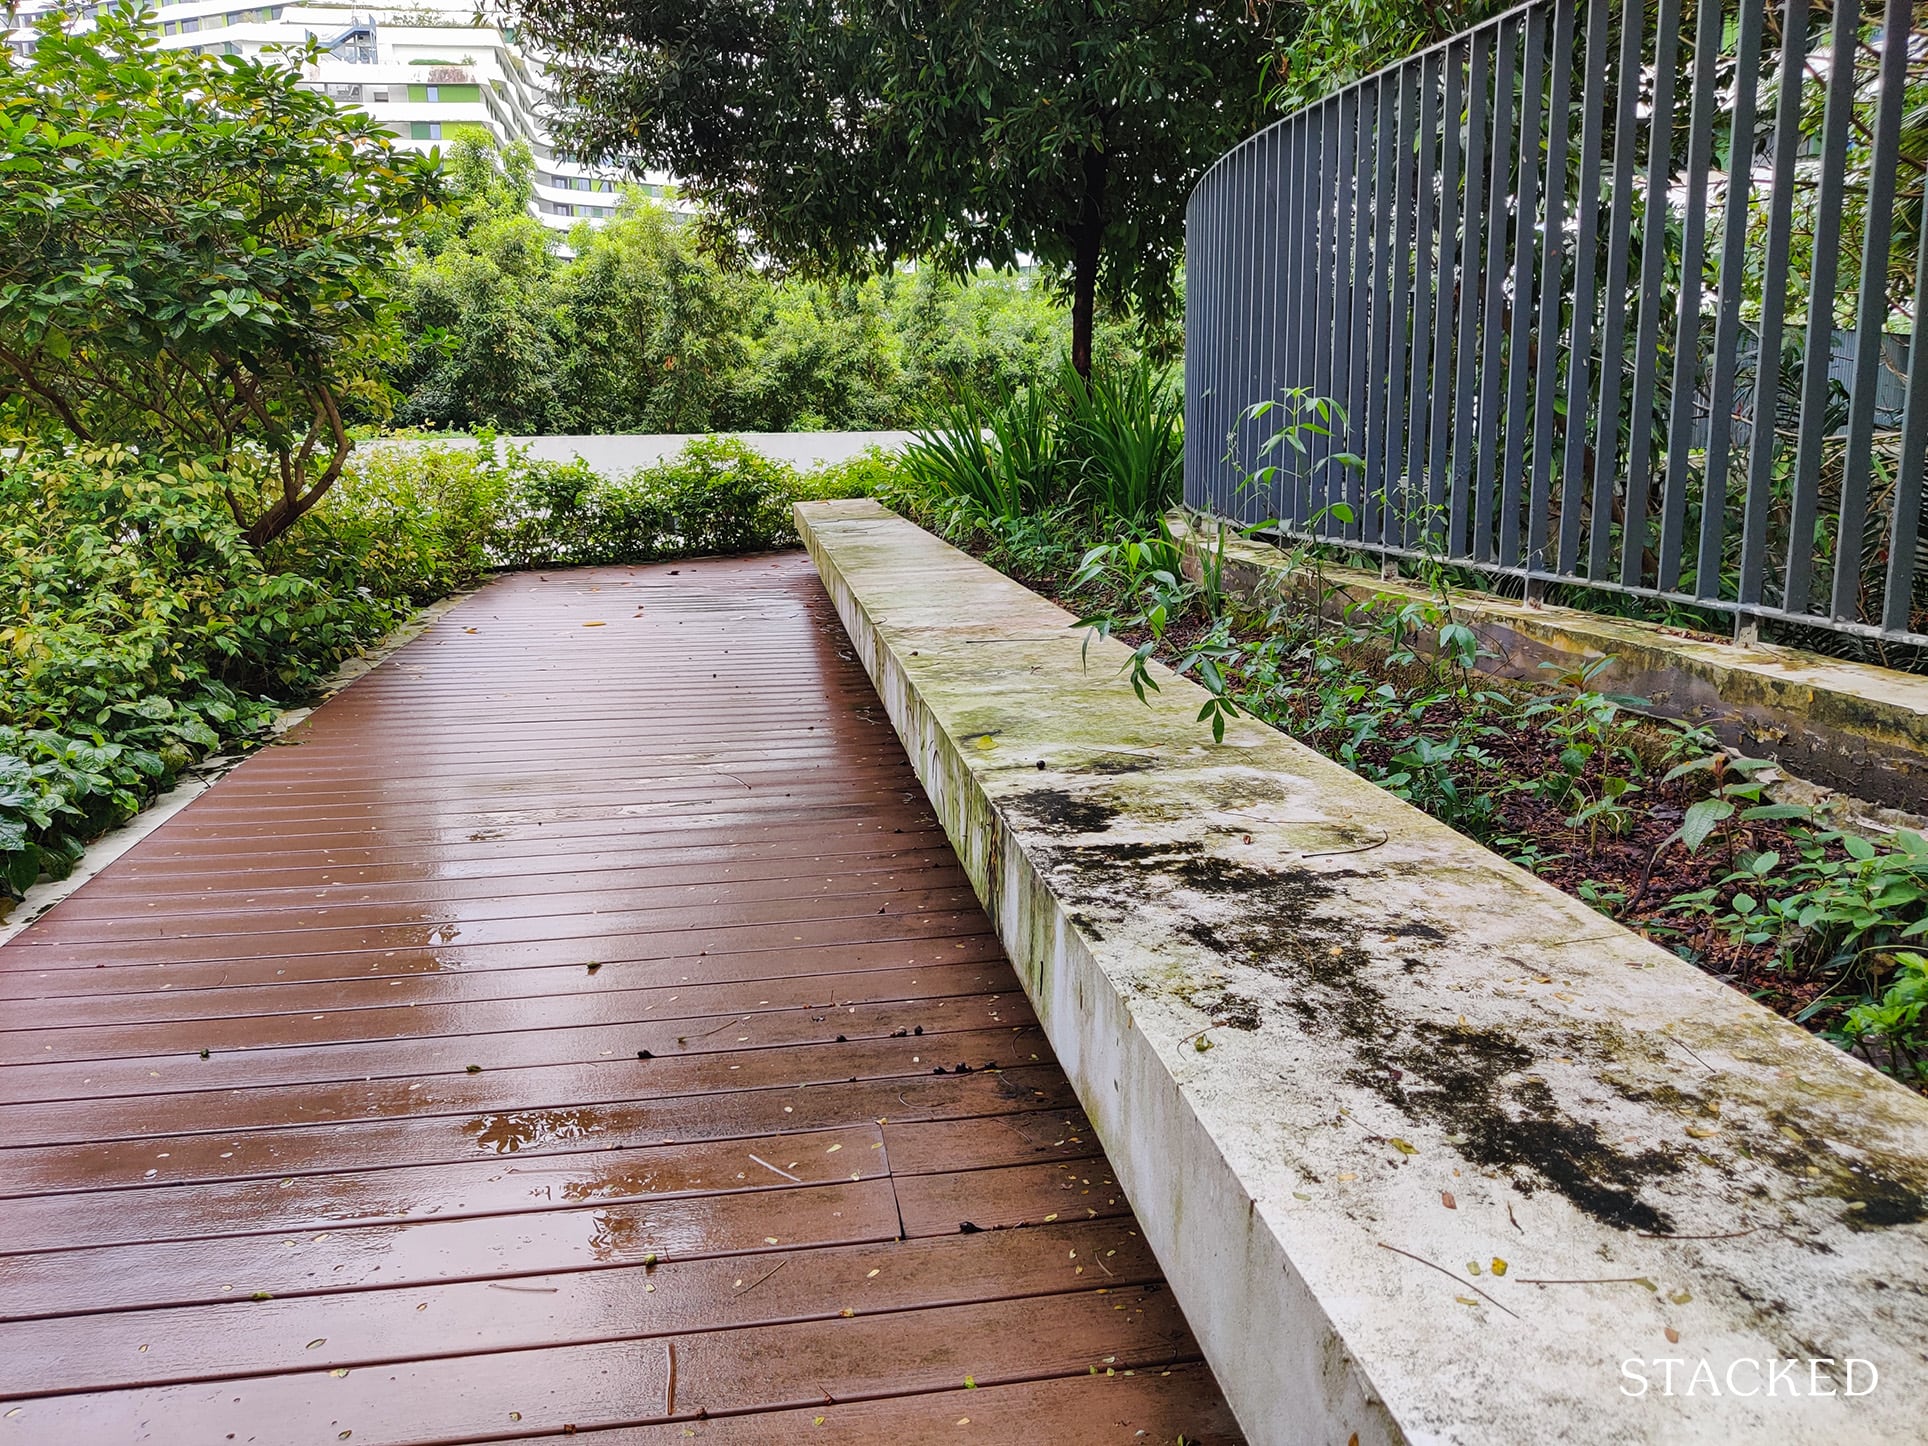 punggol waterway terraces poorly maintained